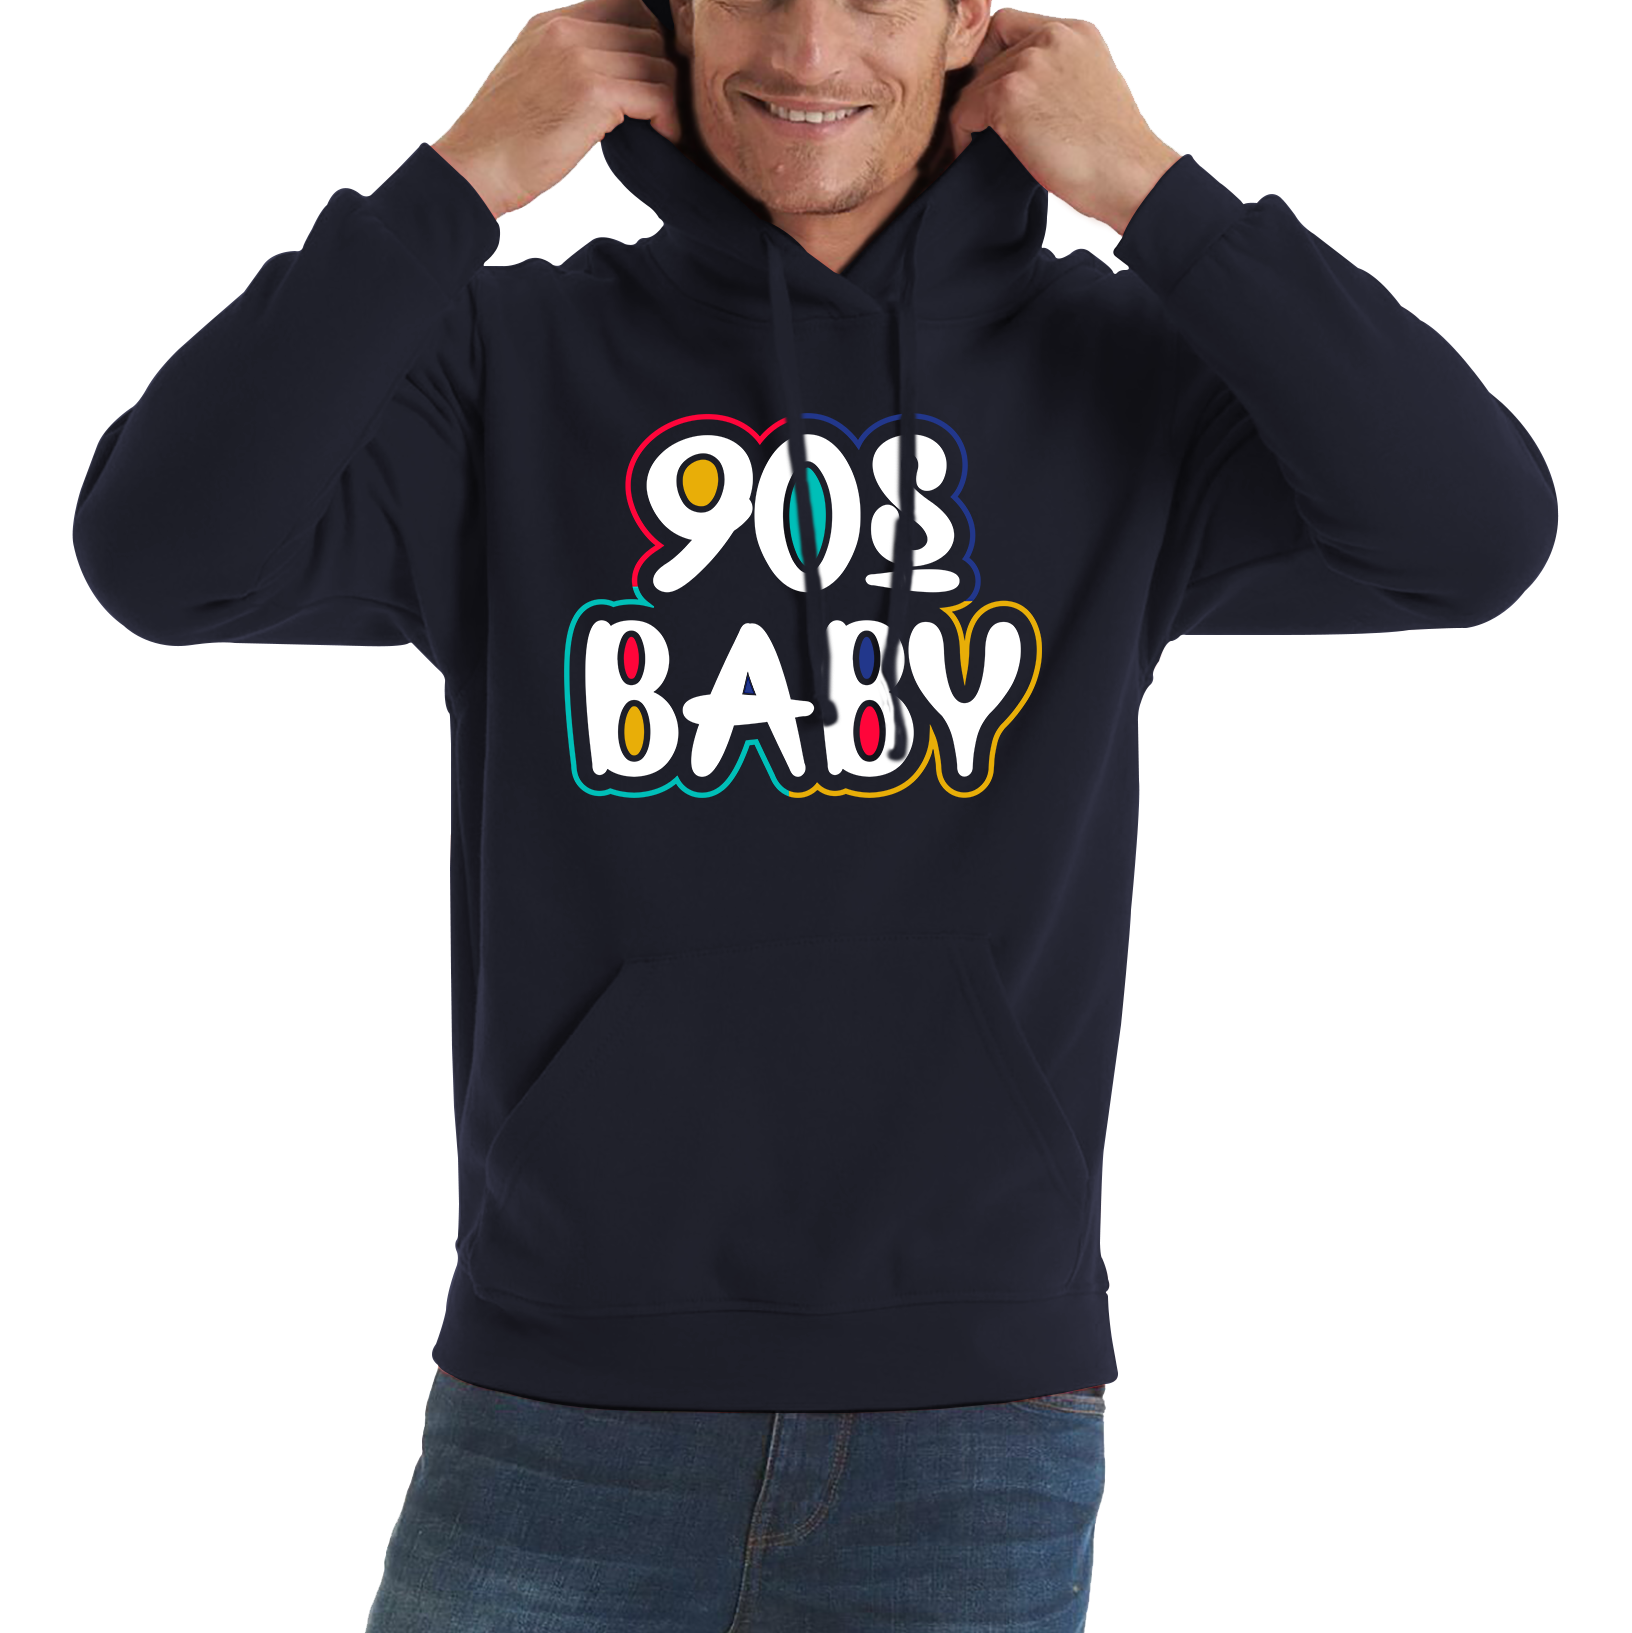 90s Baby Hoodie Awesome cool 90's baby fashion Vintag Funny Joke Novelty Design Unisex Hoodie